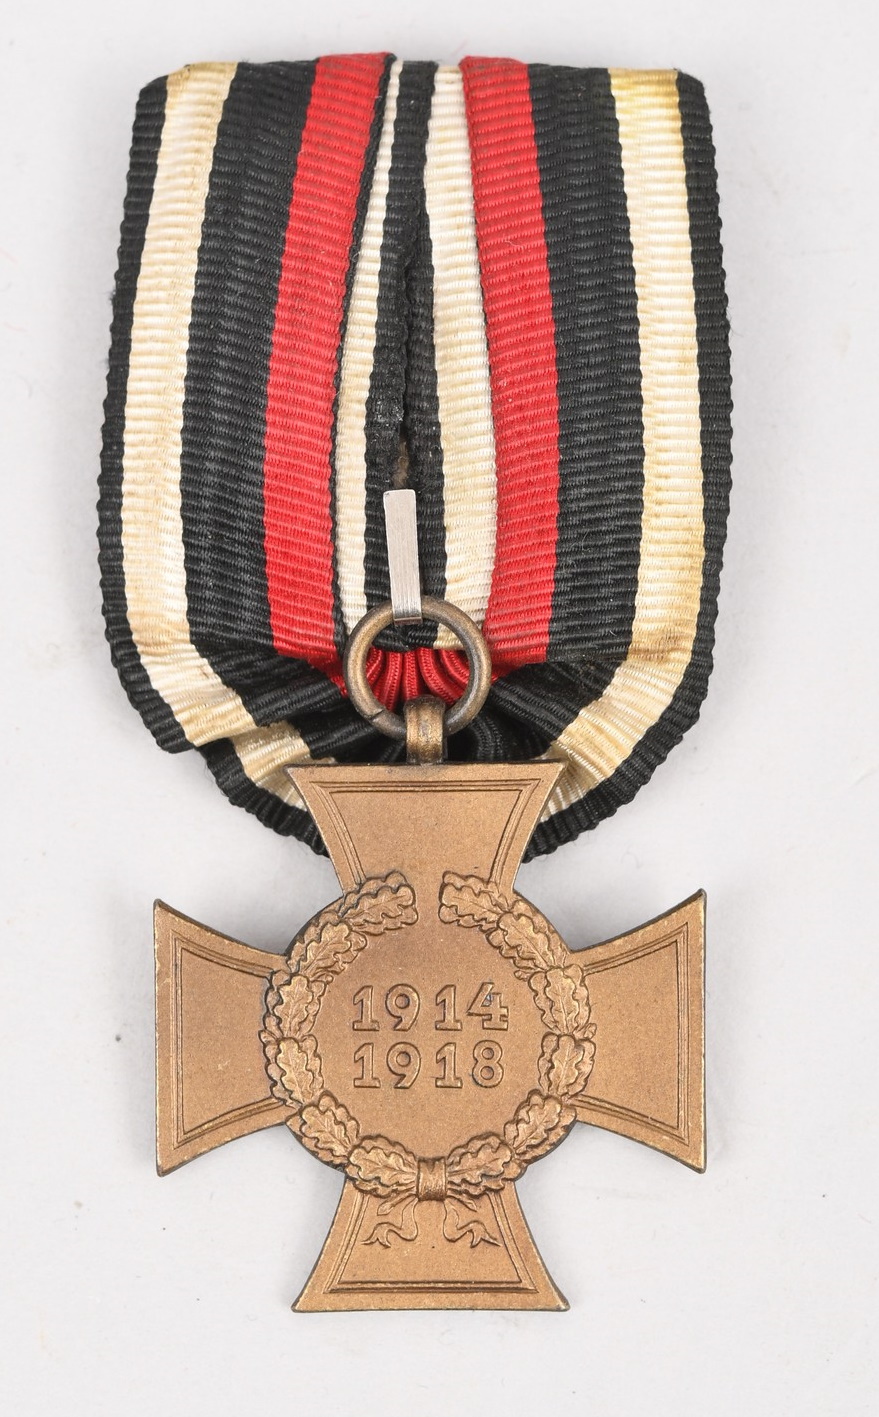 Parade Mounted Cross of Honor 1914-1918